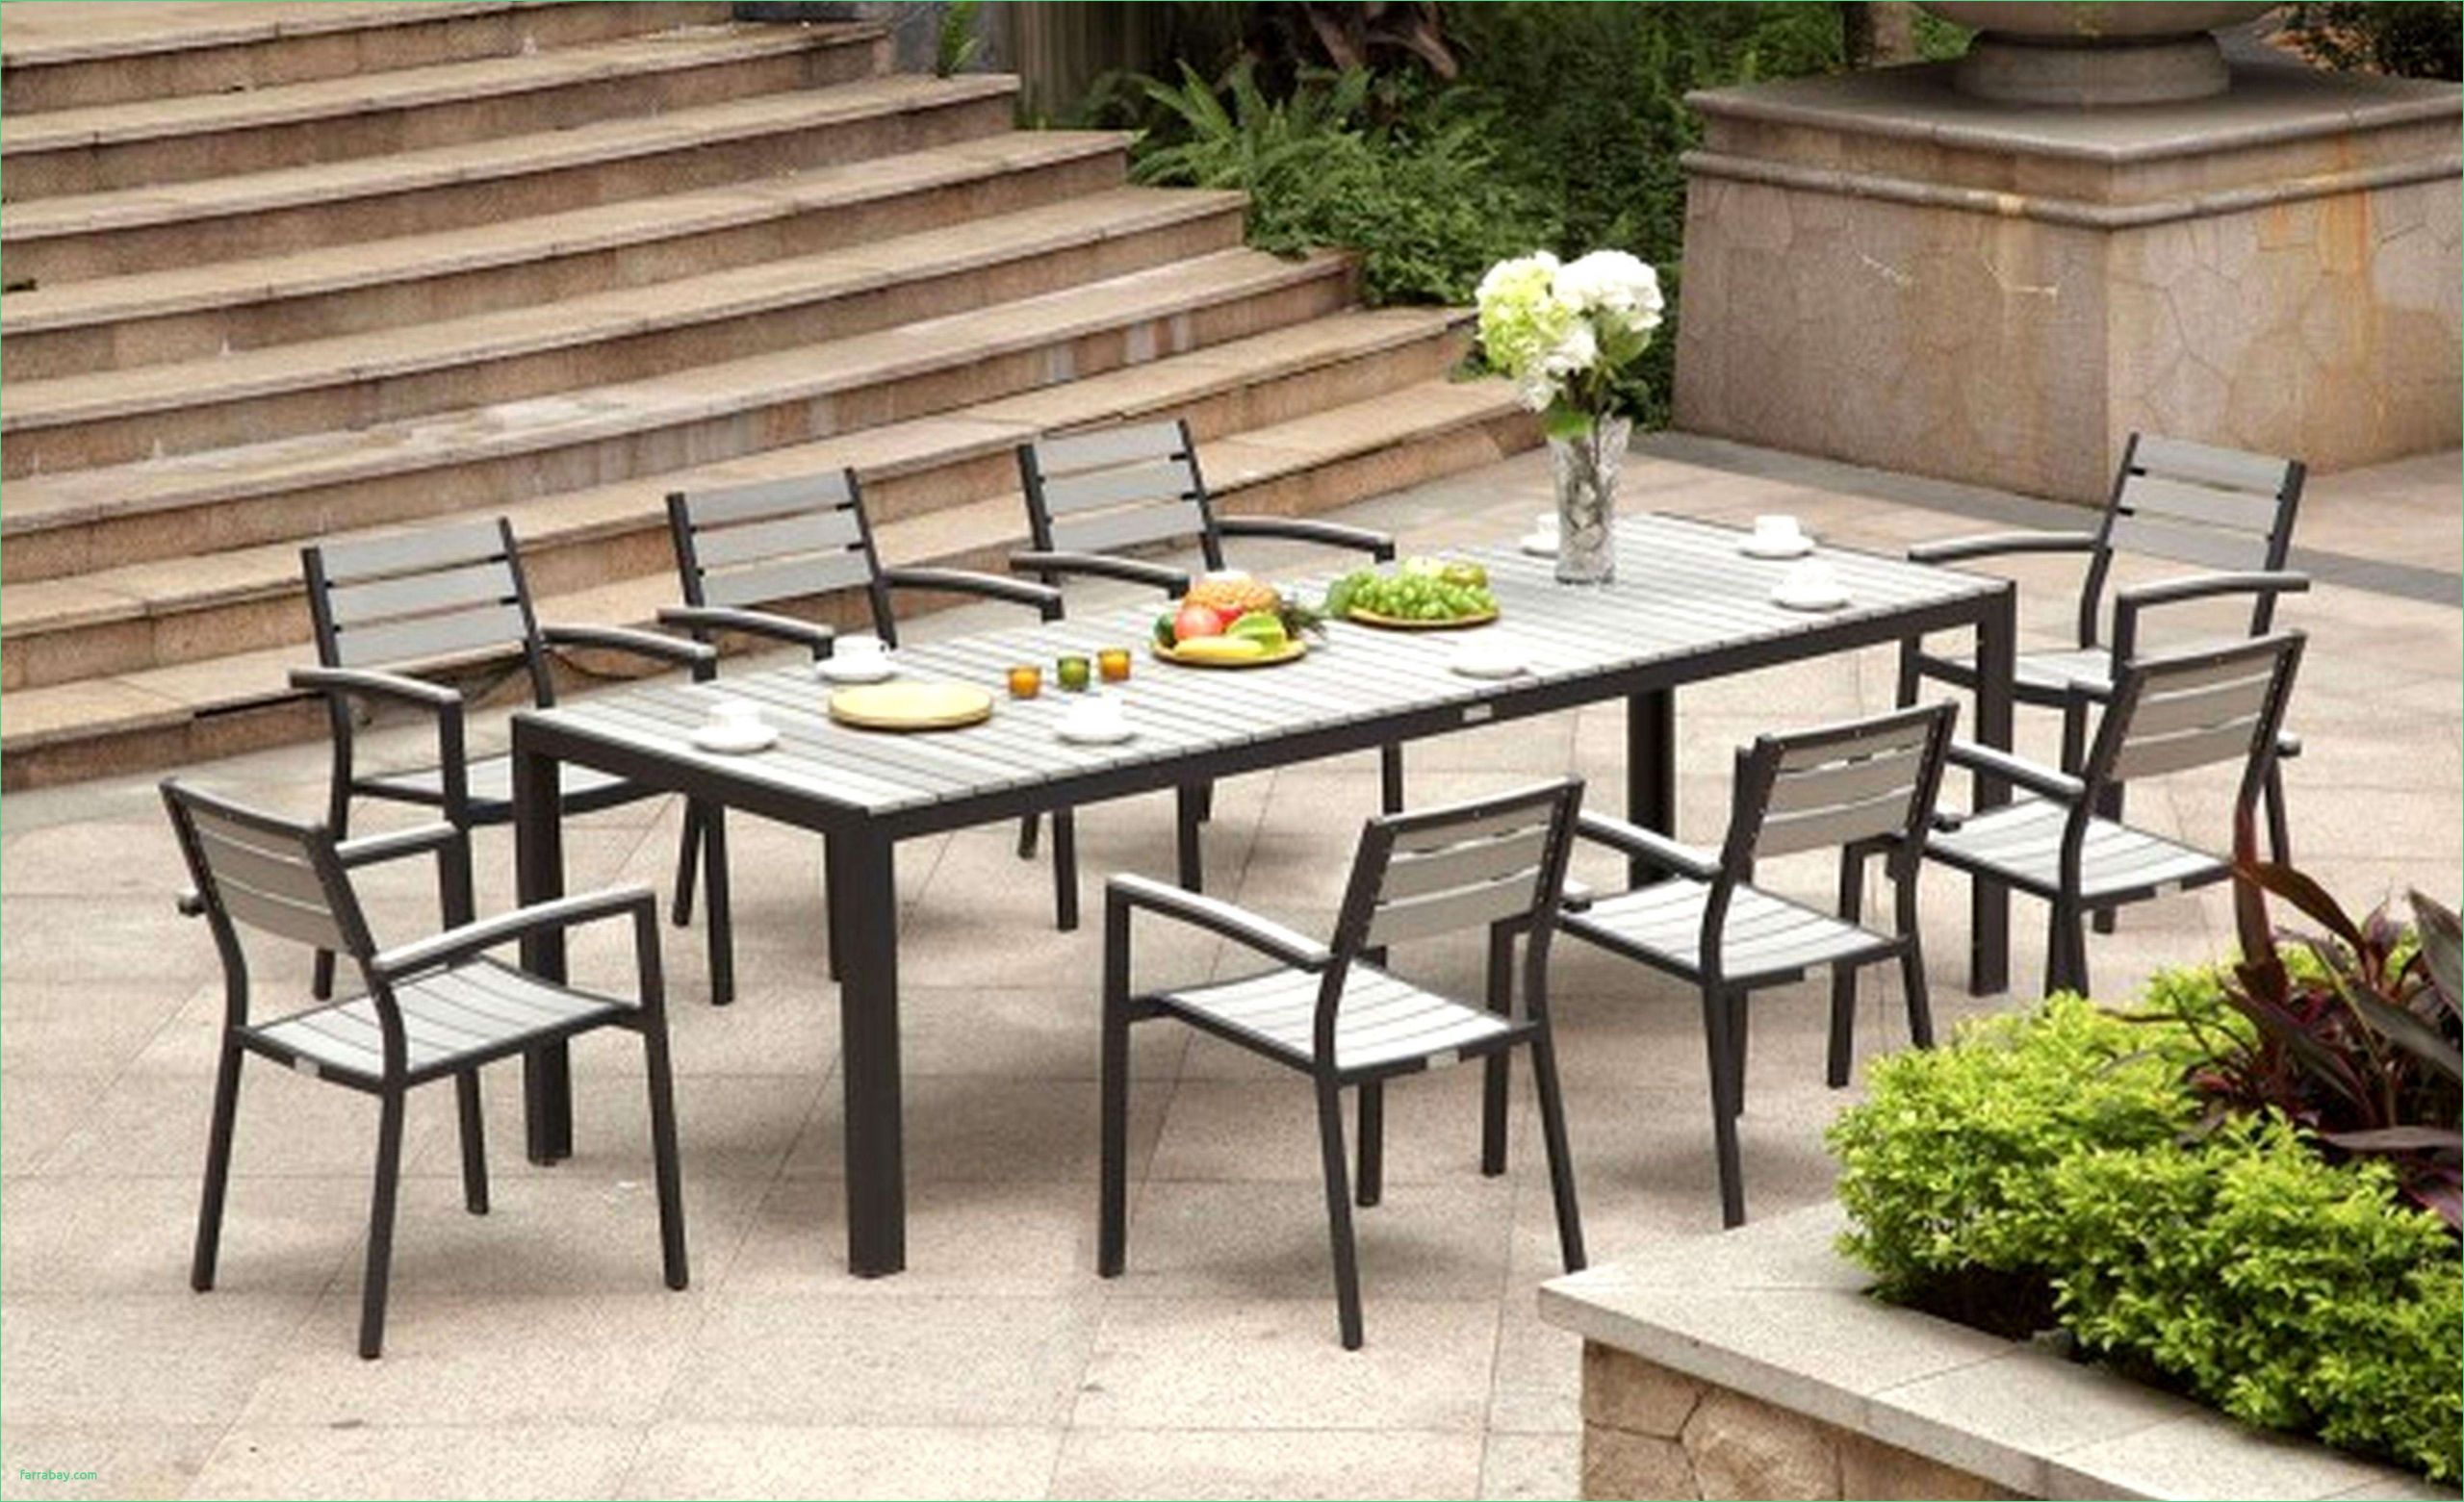 hesperide garden furniture new elegant outdoor table and chairs designsolutions usa of hesperide garden furniture